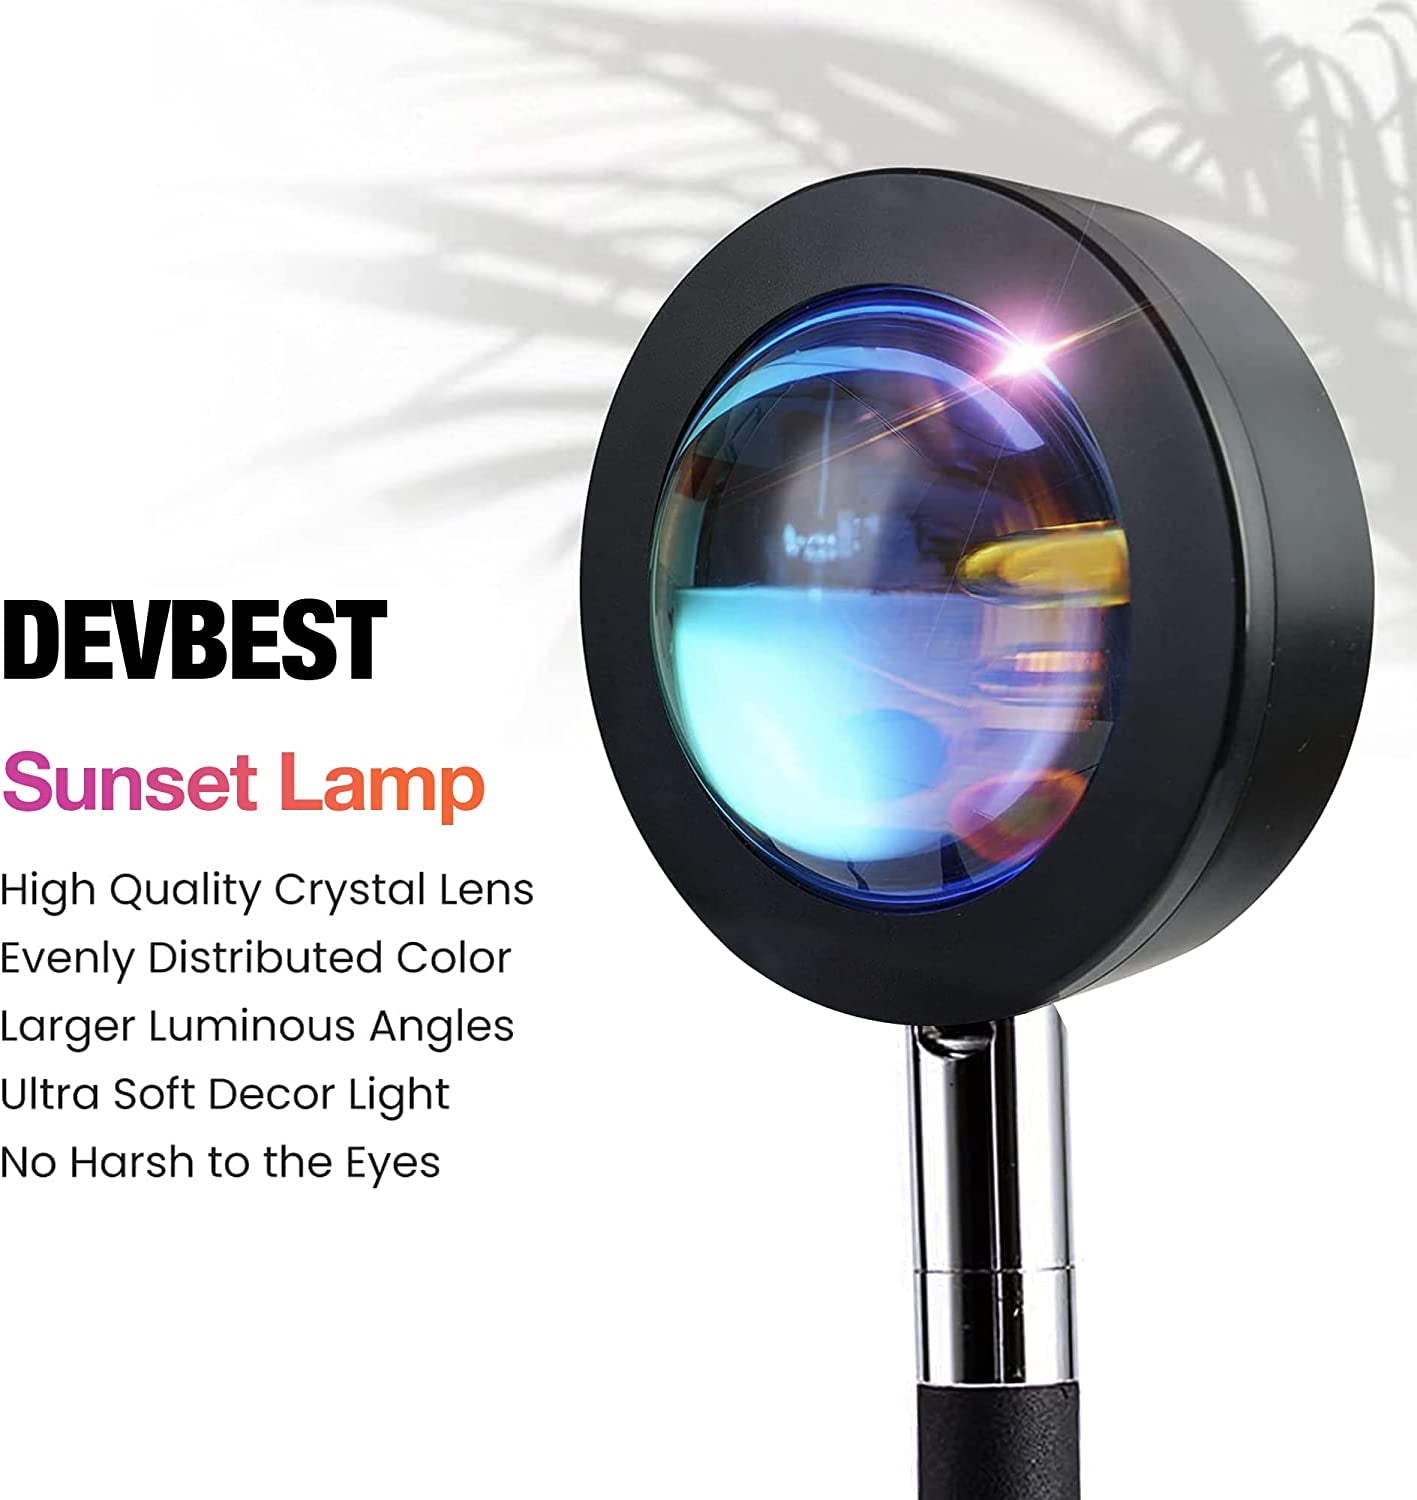 Sunset Lamp Projection, Sun Lamp, Sunlight Lamp Projector, Manual Control Light Projector, Golden Hour 4 Filter 6 Color Changing Night Light for Sunset Projection Lamp, Photography/Party/Home/Bedroom